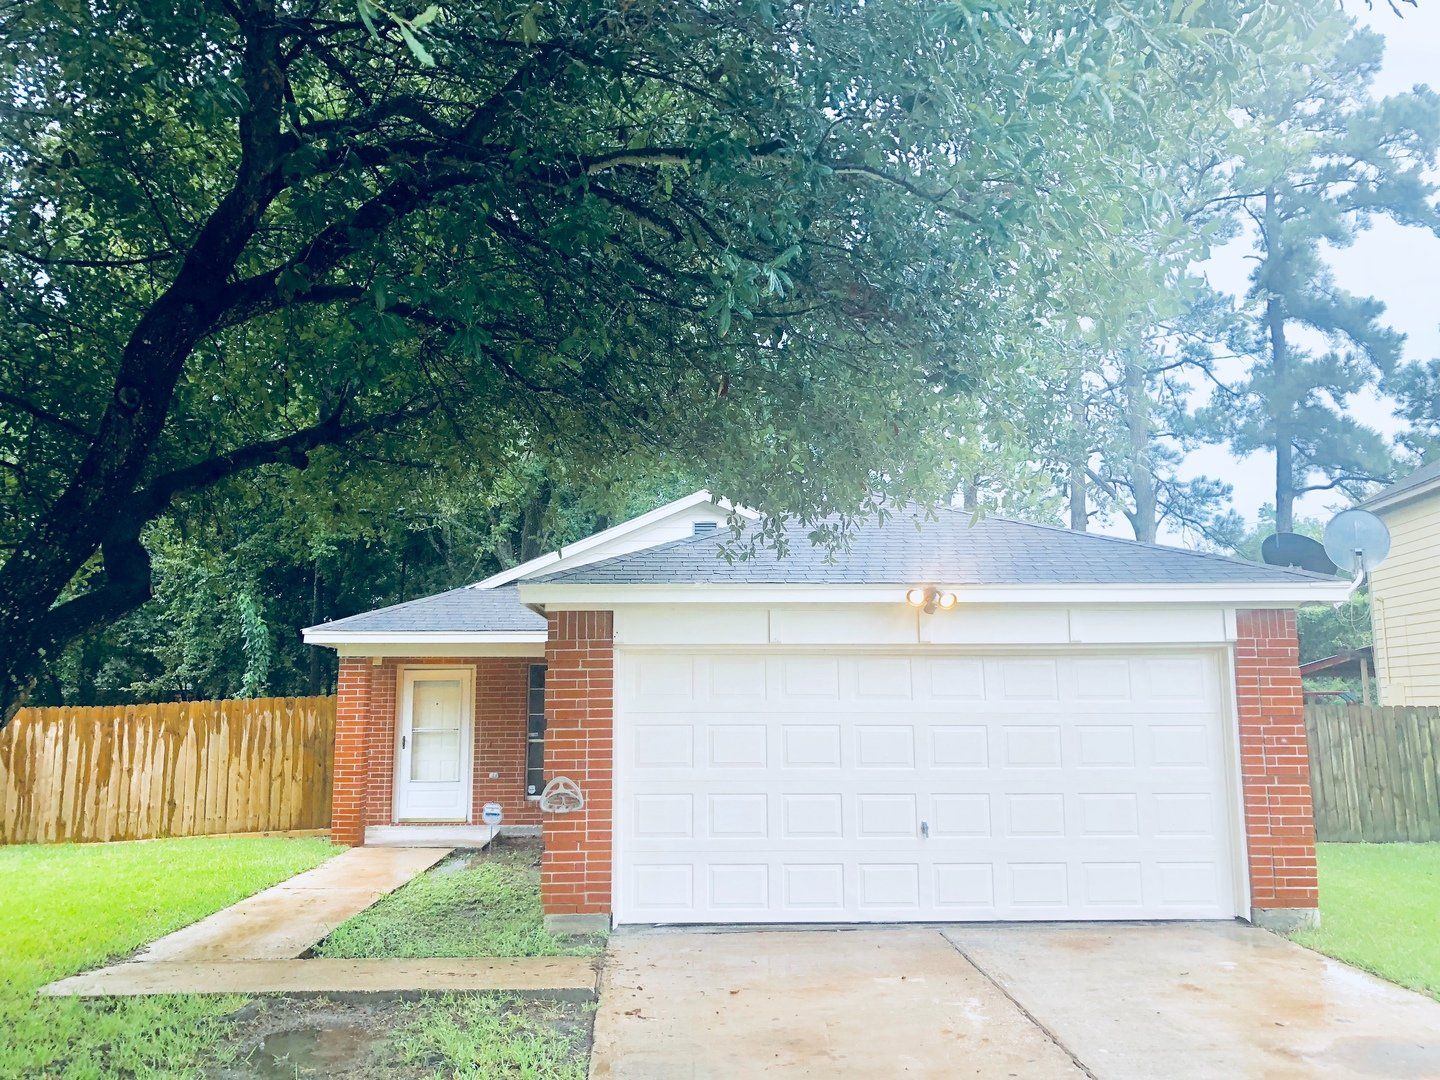 For rent home in Channelview for $1300